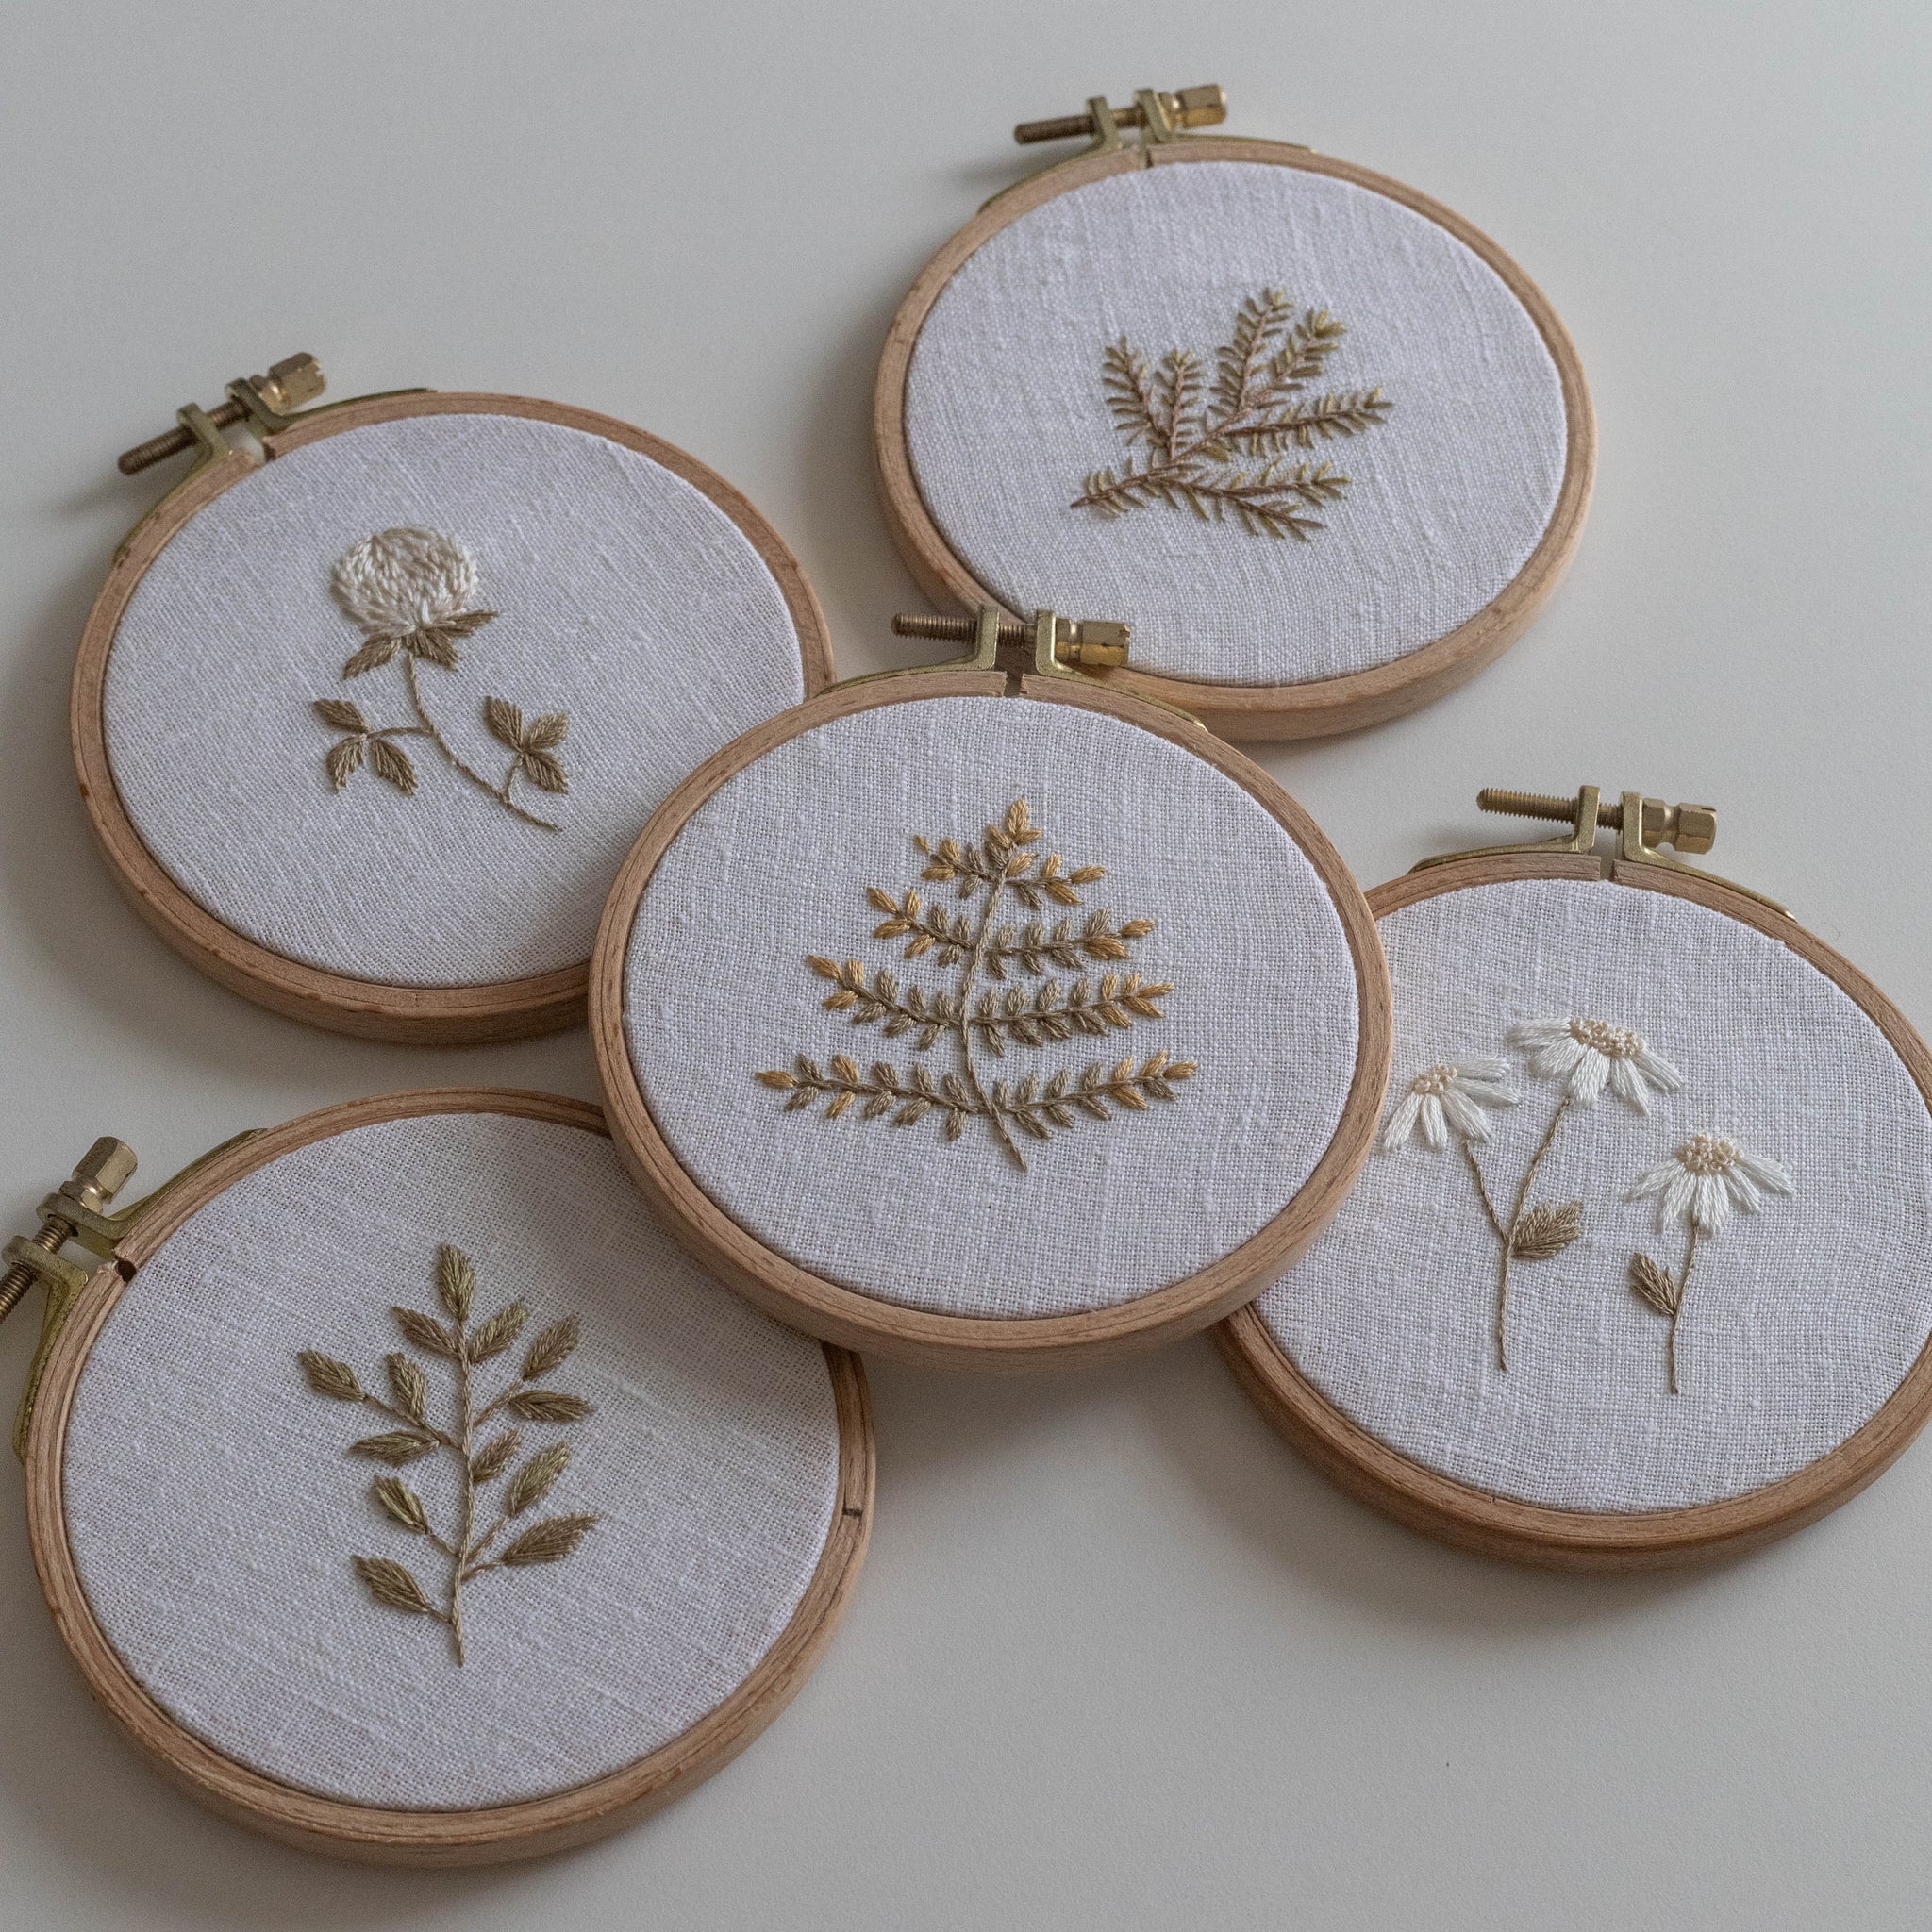 Wildflowers Embroidery Pattern Video Tutorial, Beginner Embroidery PDF  Pattern, Botanical Embroidery Designs 